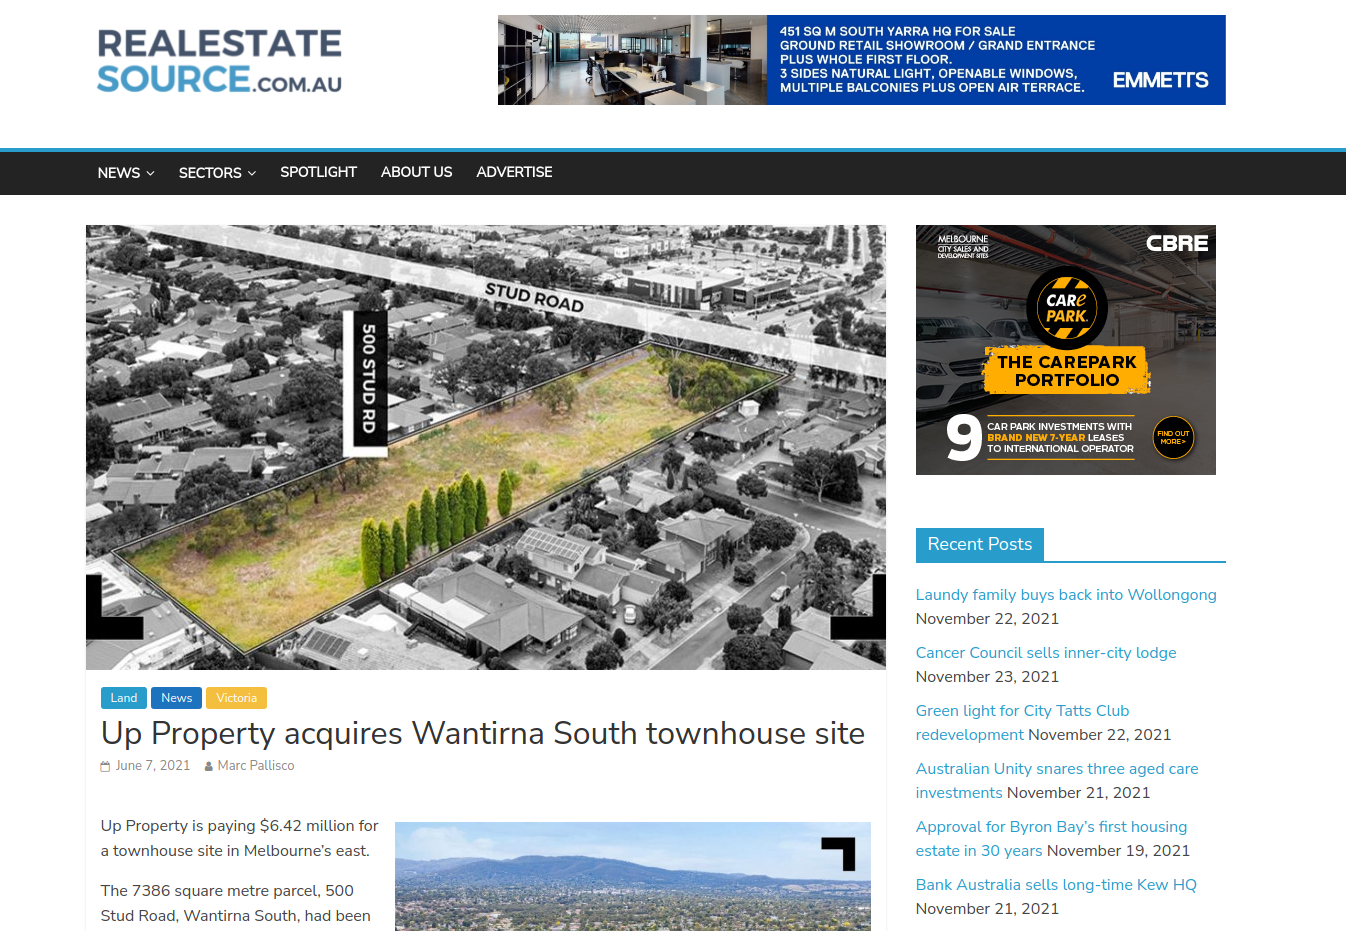 Up Property acquires Wantirna South Townhouse site